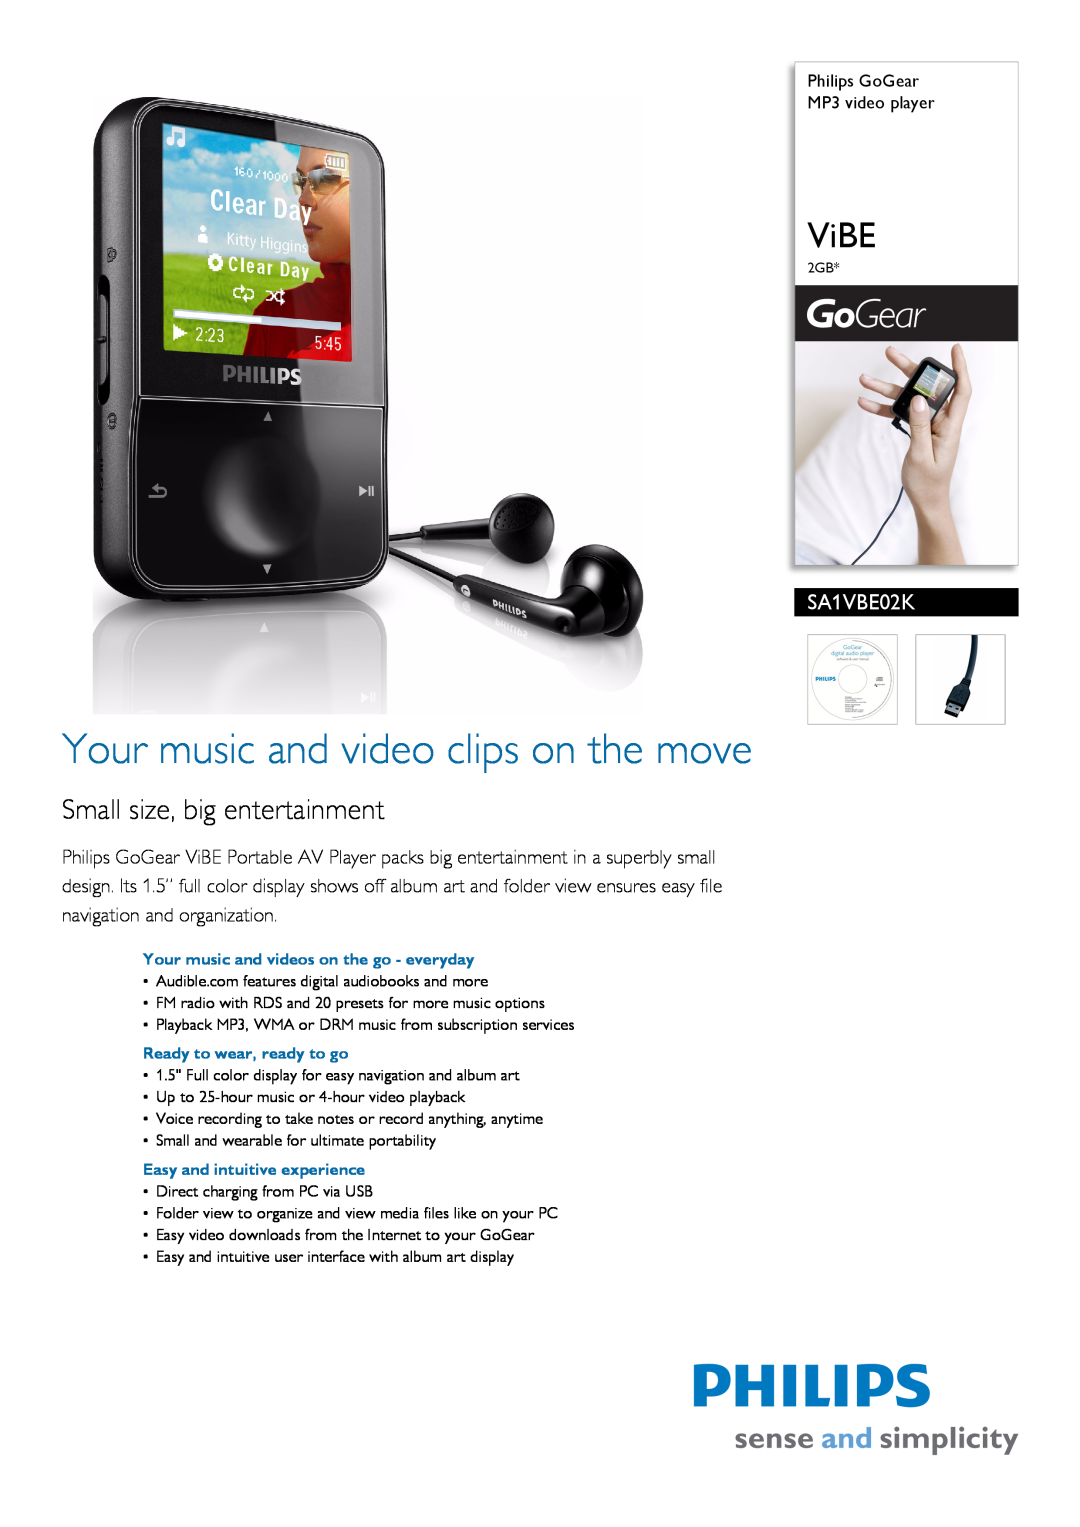 Philips SA1VBE02K/97 manual Philips GoGear MP3 video player, Your music and video clips on the move, ViBE 